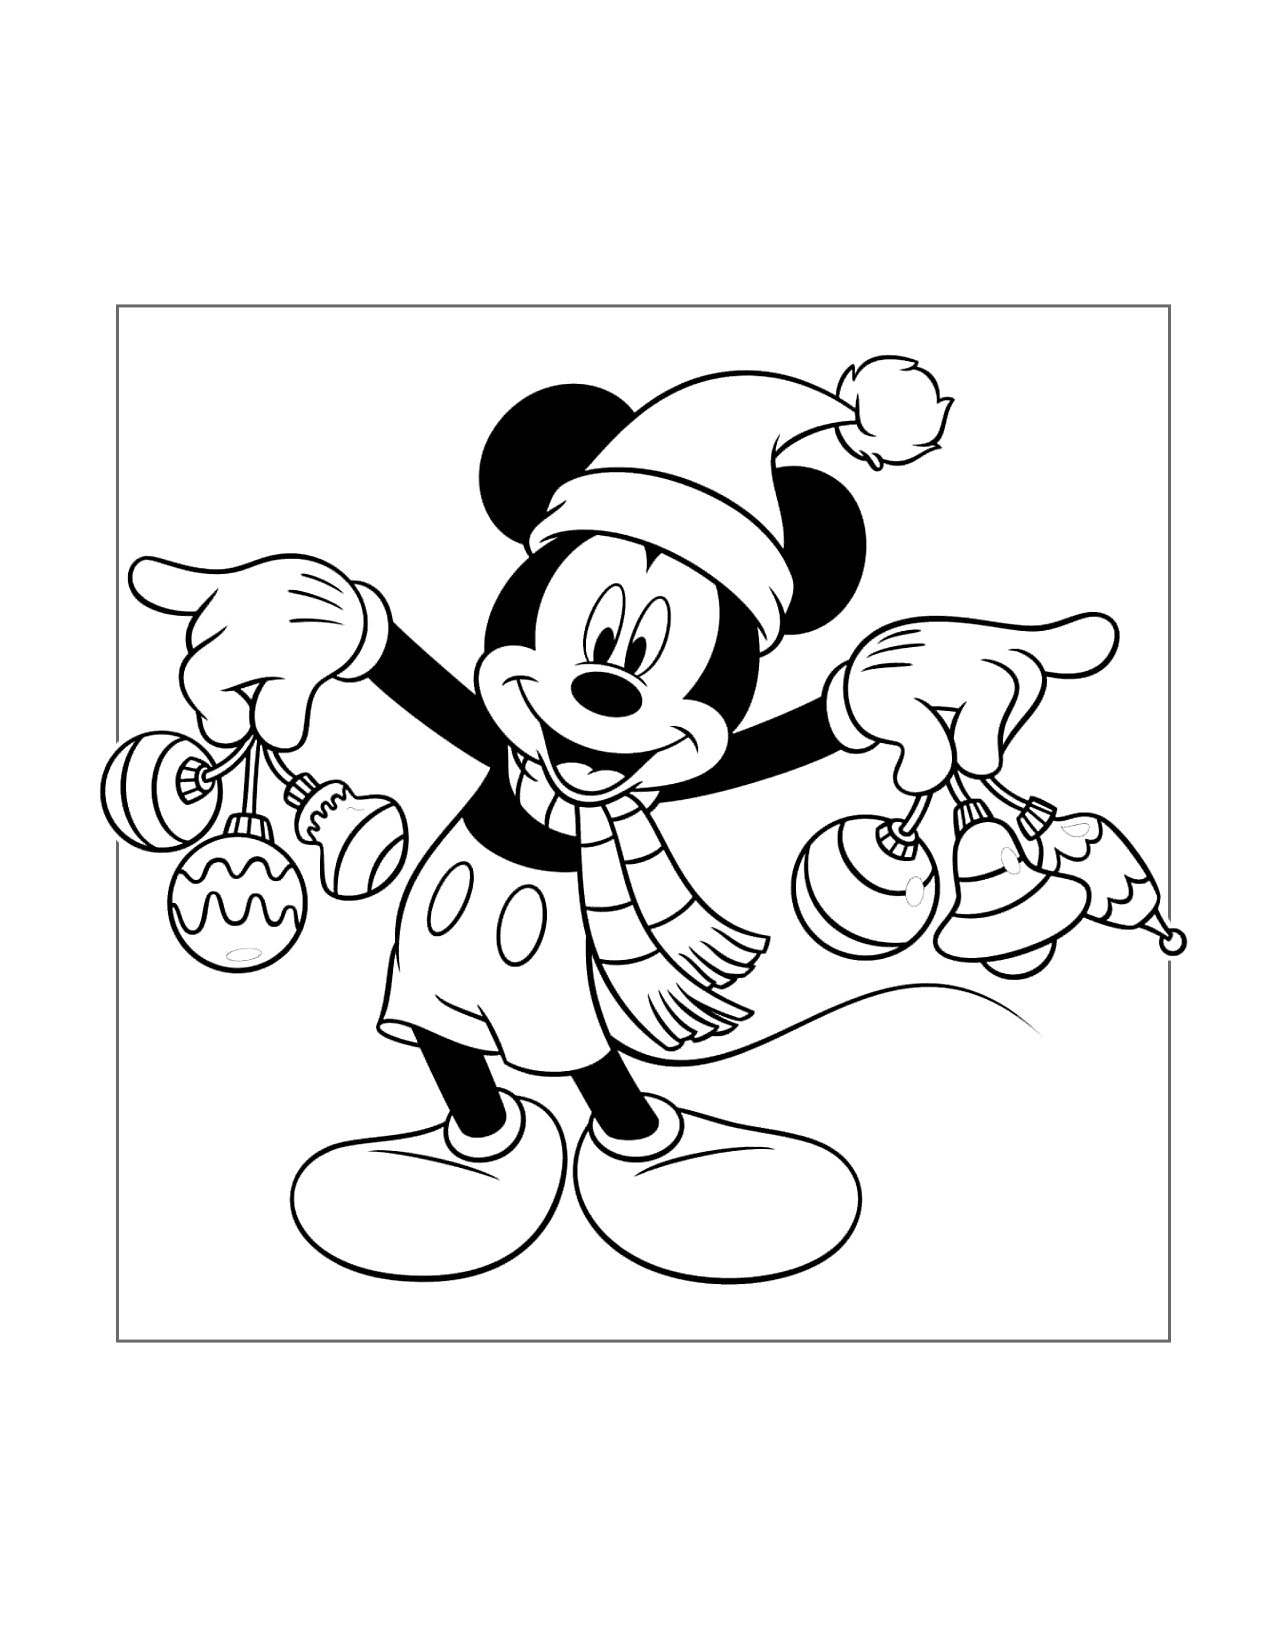 Mickey Mouse Decorates With Christmas Tree Ornaments Coloring Page